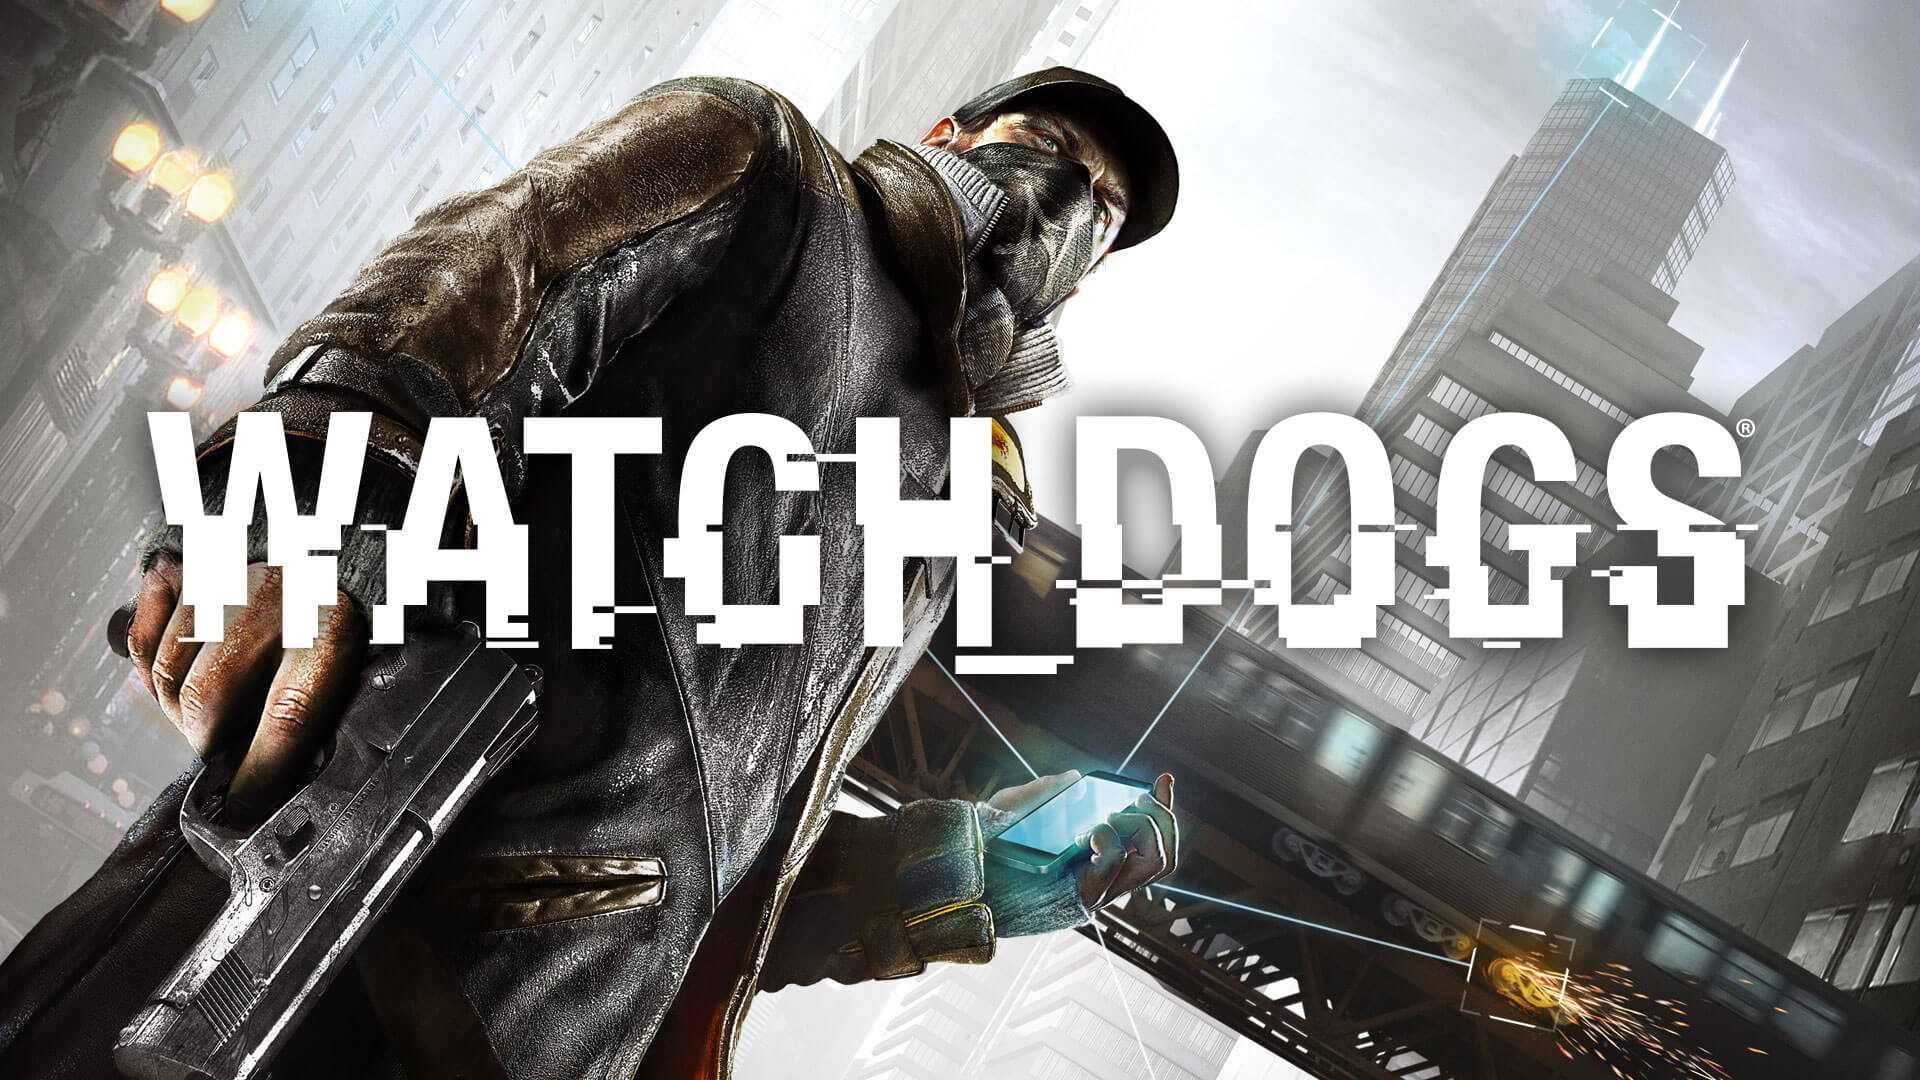 Marketing cover photo for Watch Dogs showing the protagonist behind the stylized logo type